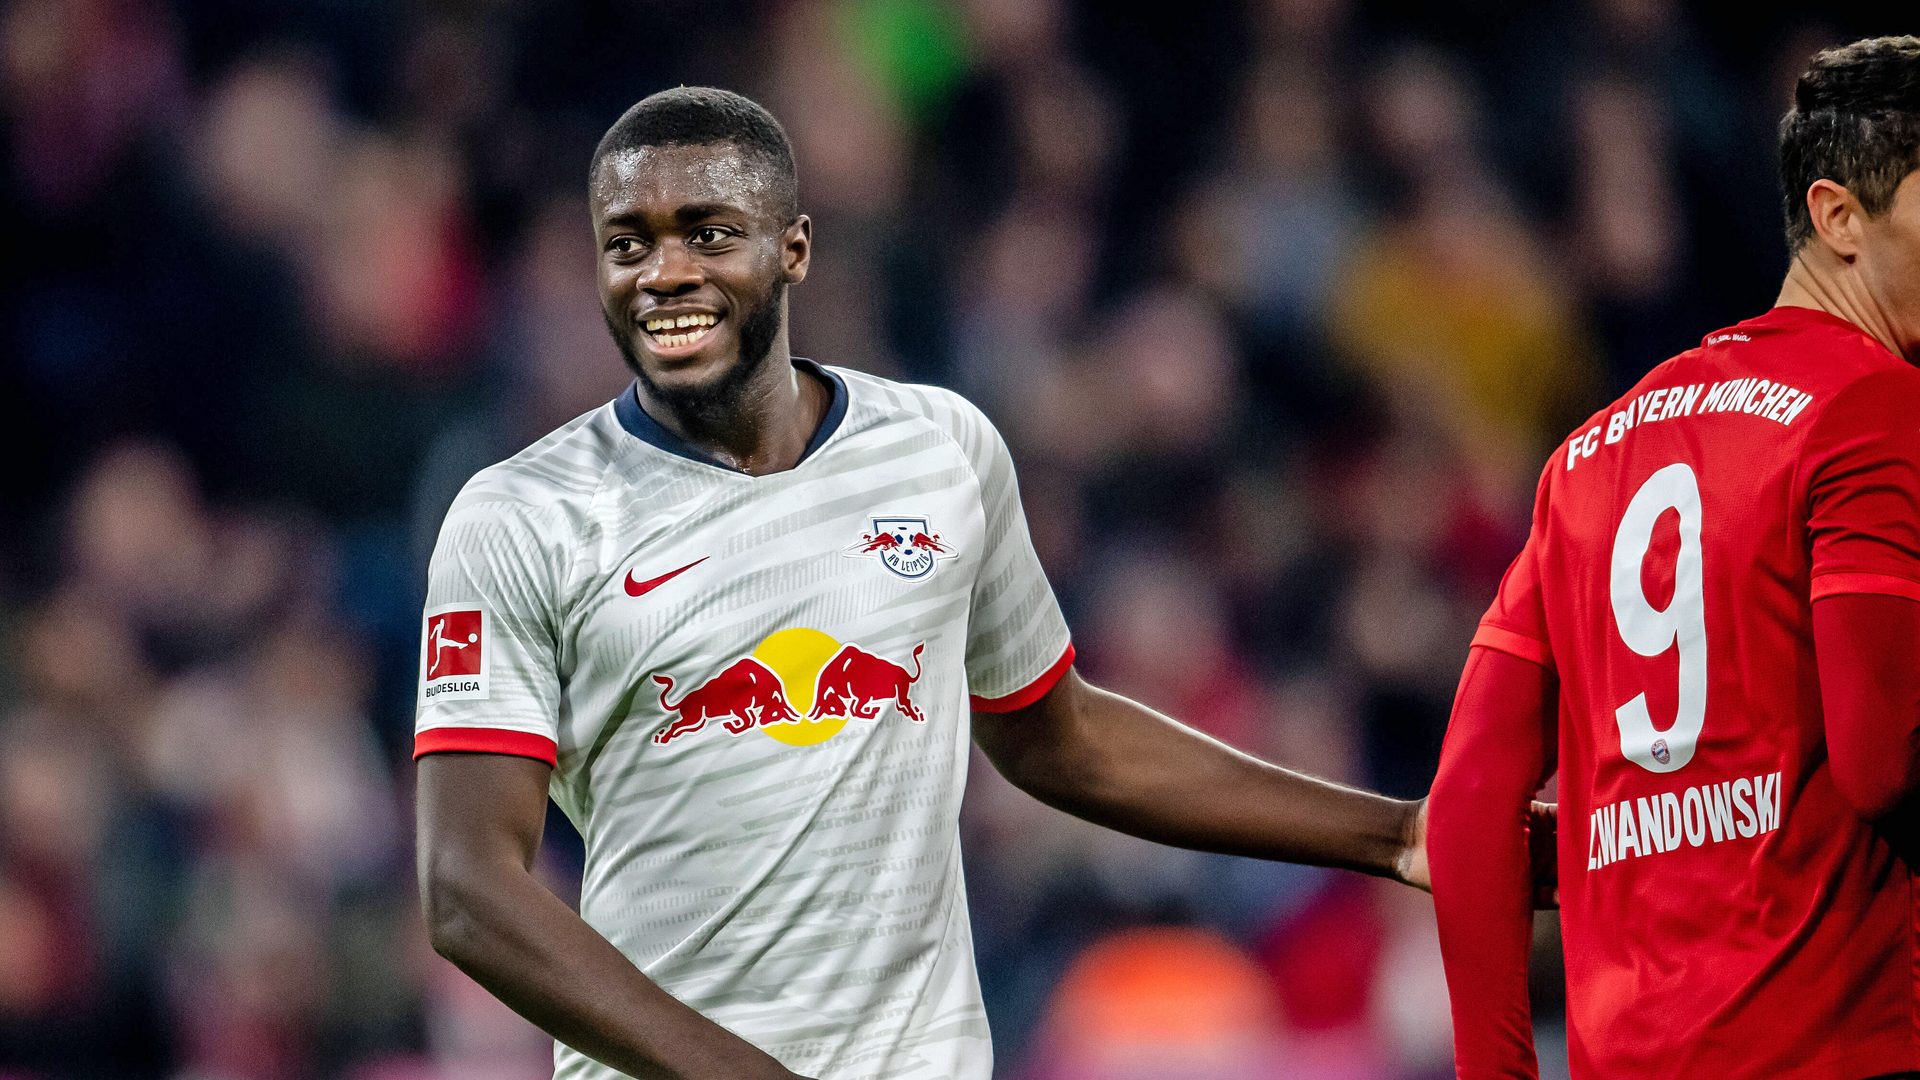 Dayot Upamecano agrees to join Bayern Munich from RB Leipzig